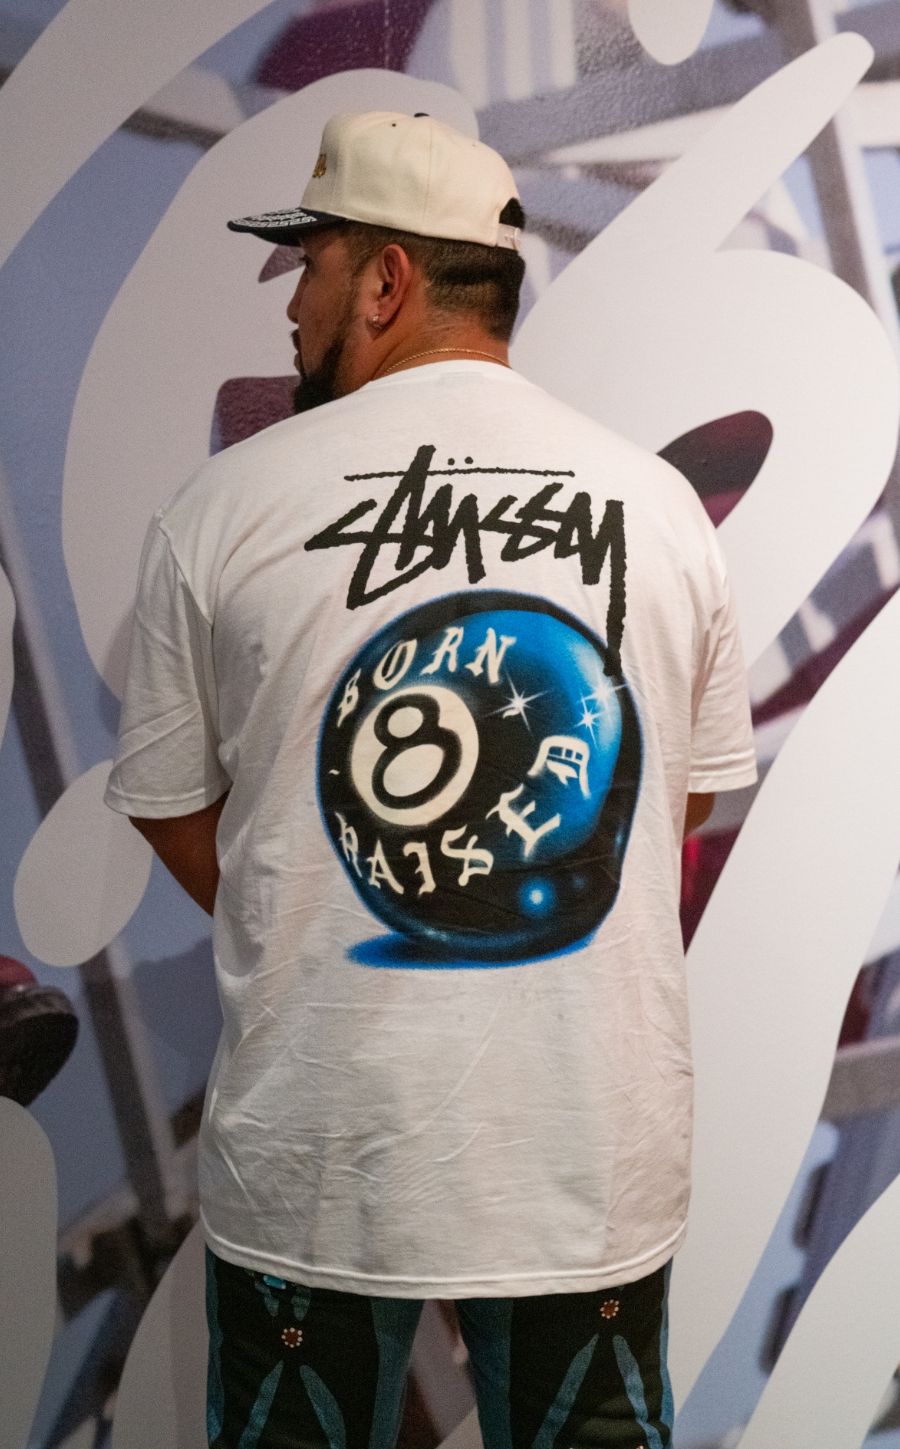 Back view of man standing facing gallery wall. Back of shirt says Stussy Born 8 Raised on an eight ball